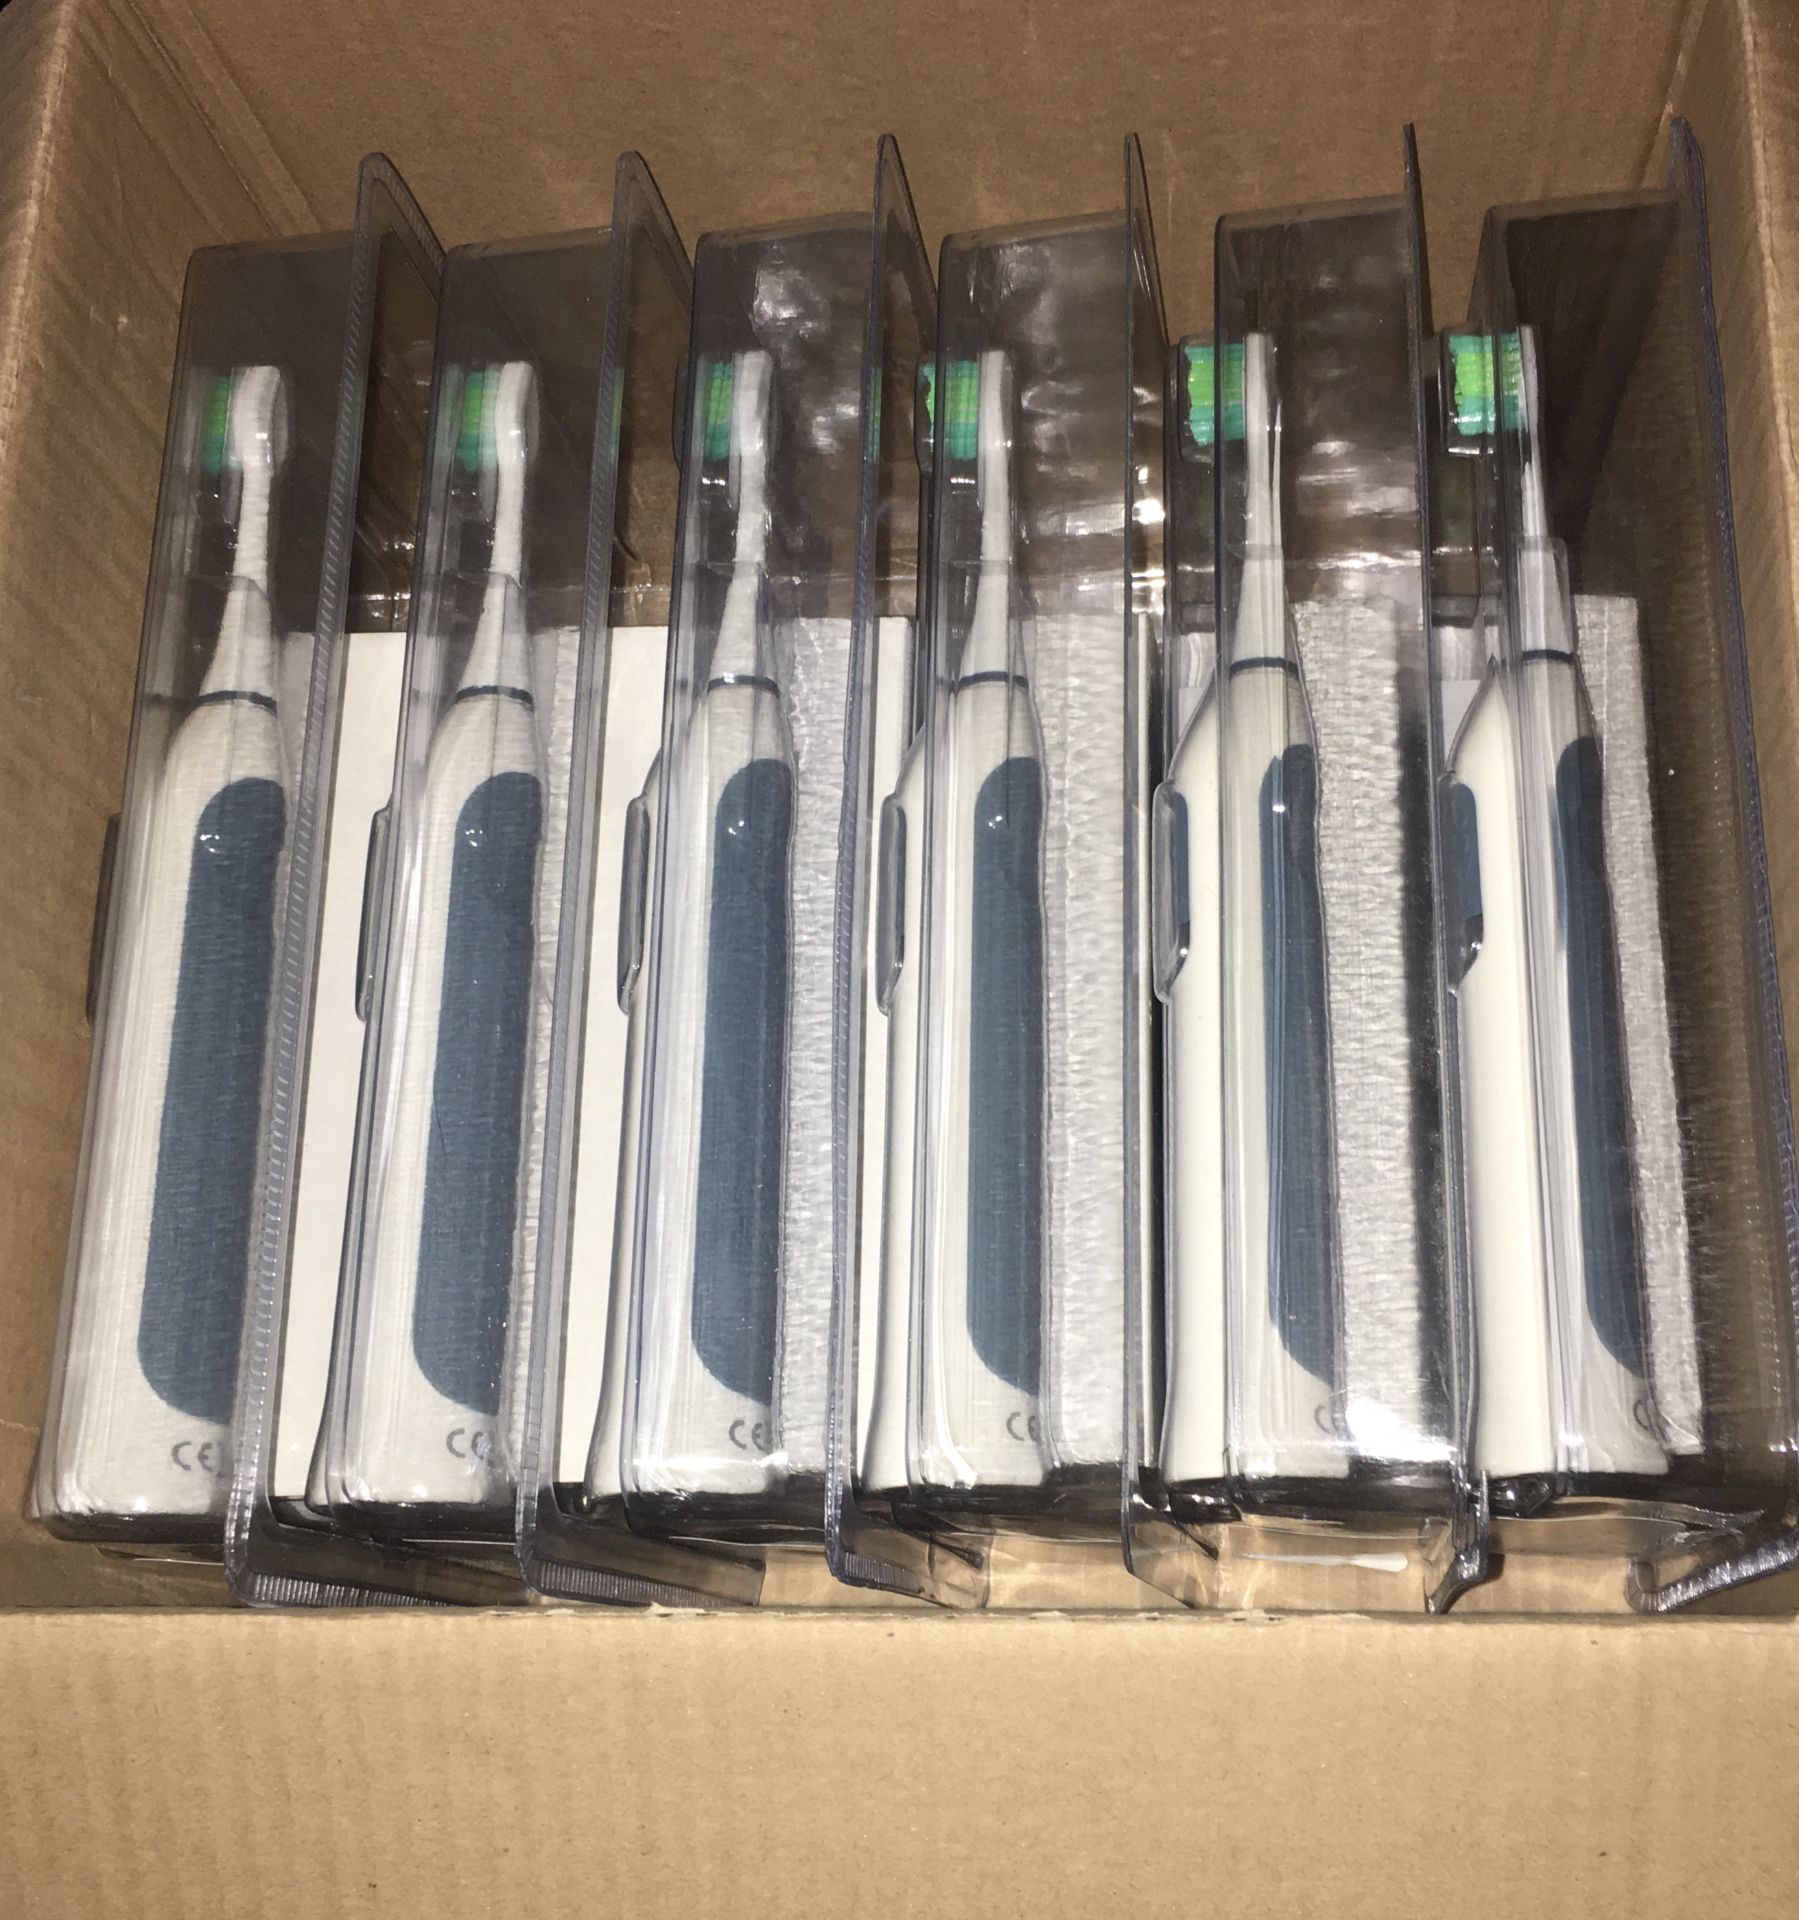 6 x New Sonic Toothbrushes - Image 2 of 2